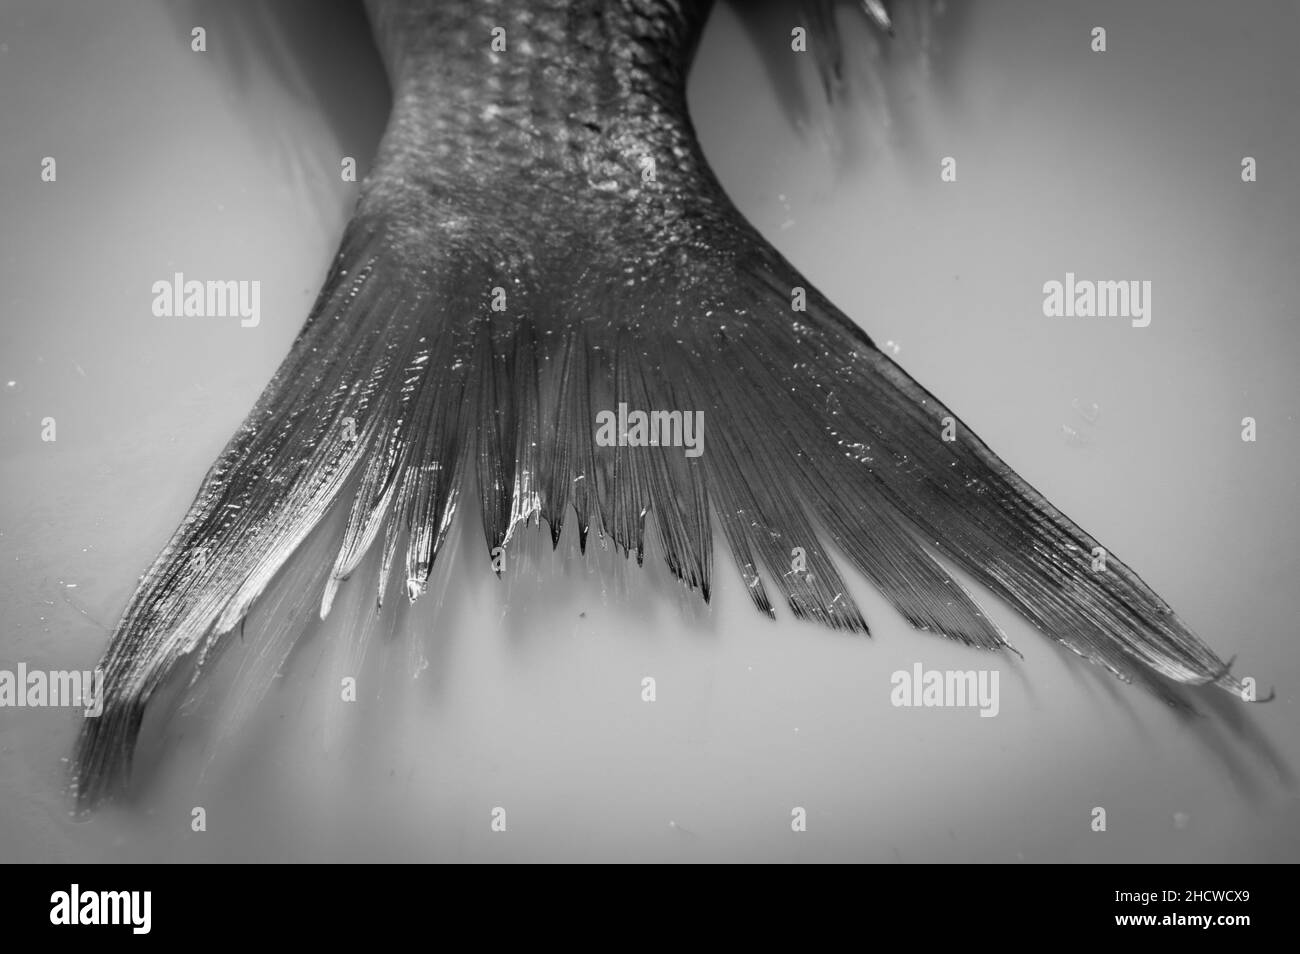 Saltwater fish Black and White Stock Photos & Images - Alamy